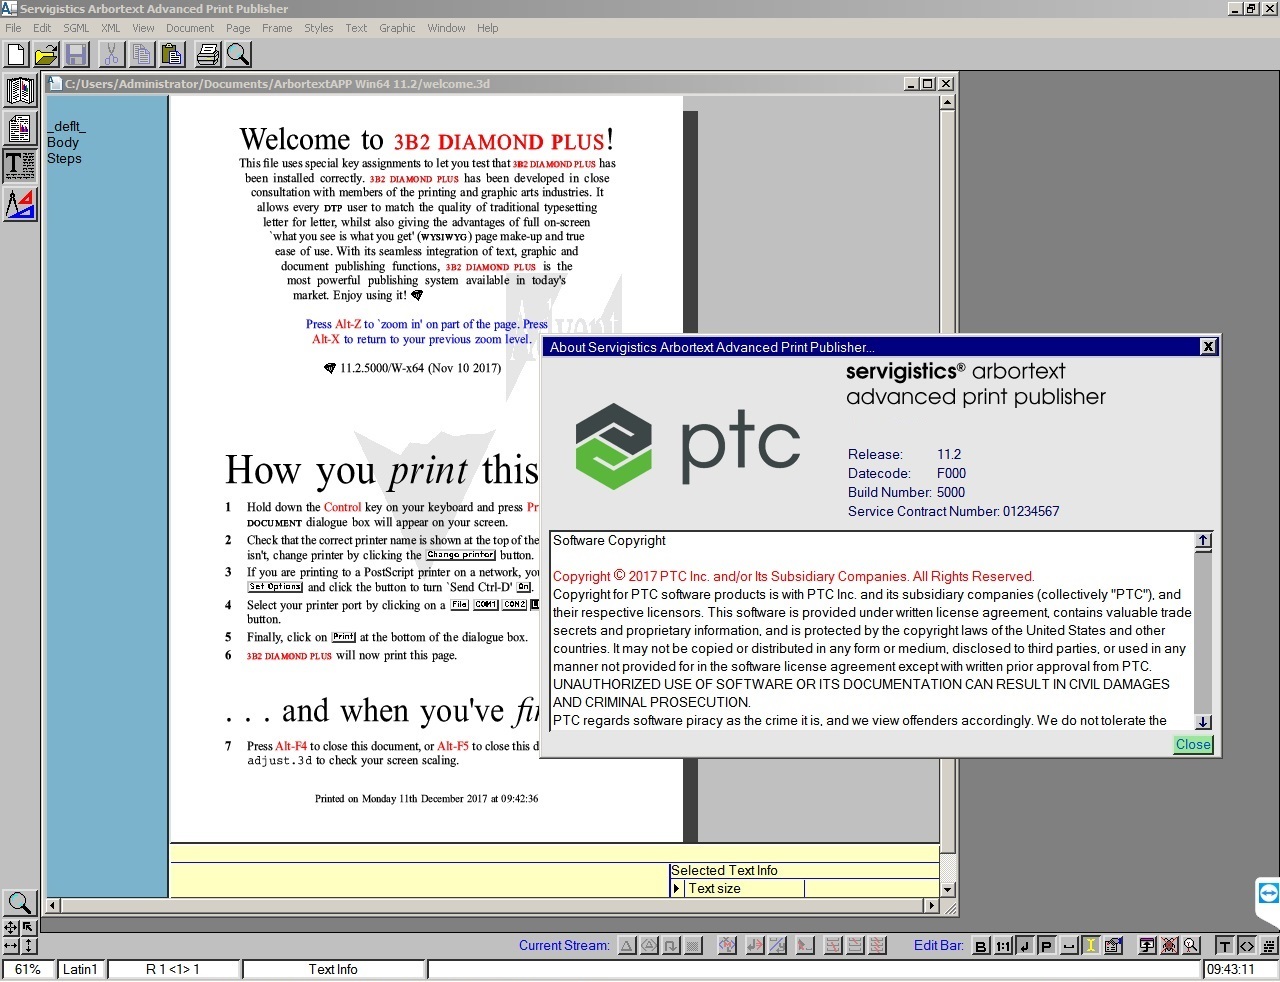 Working with PTC Arbortext Advanced Print Publisher 11.2 F000 full